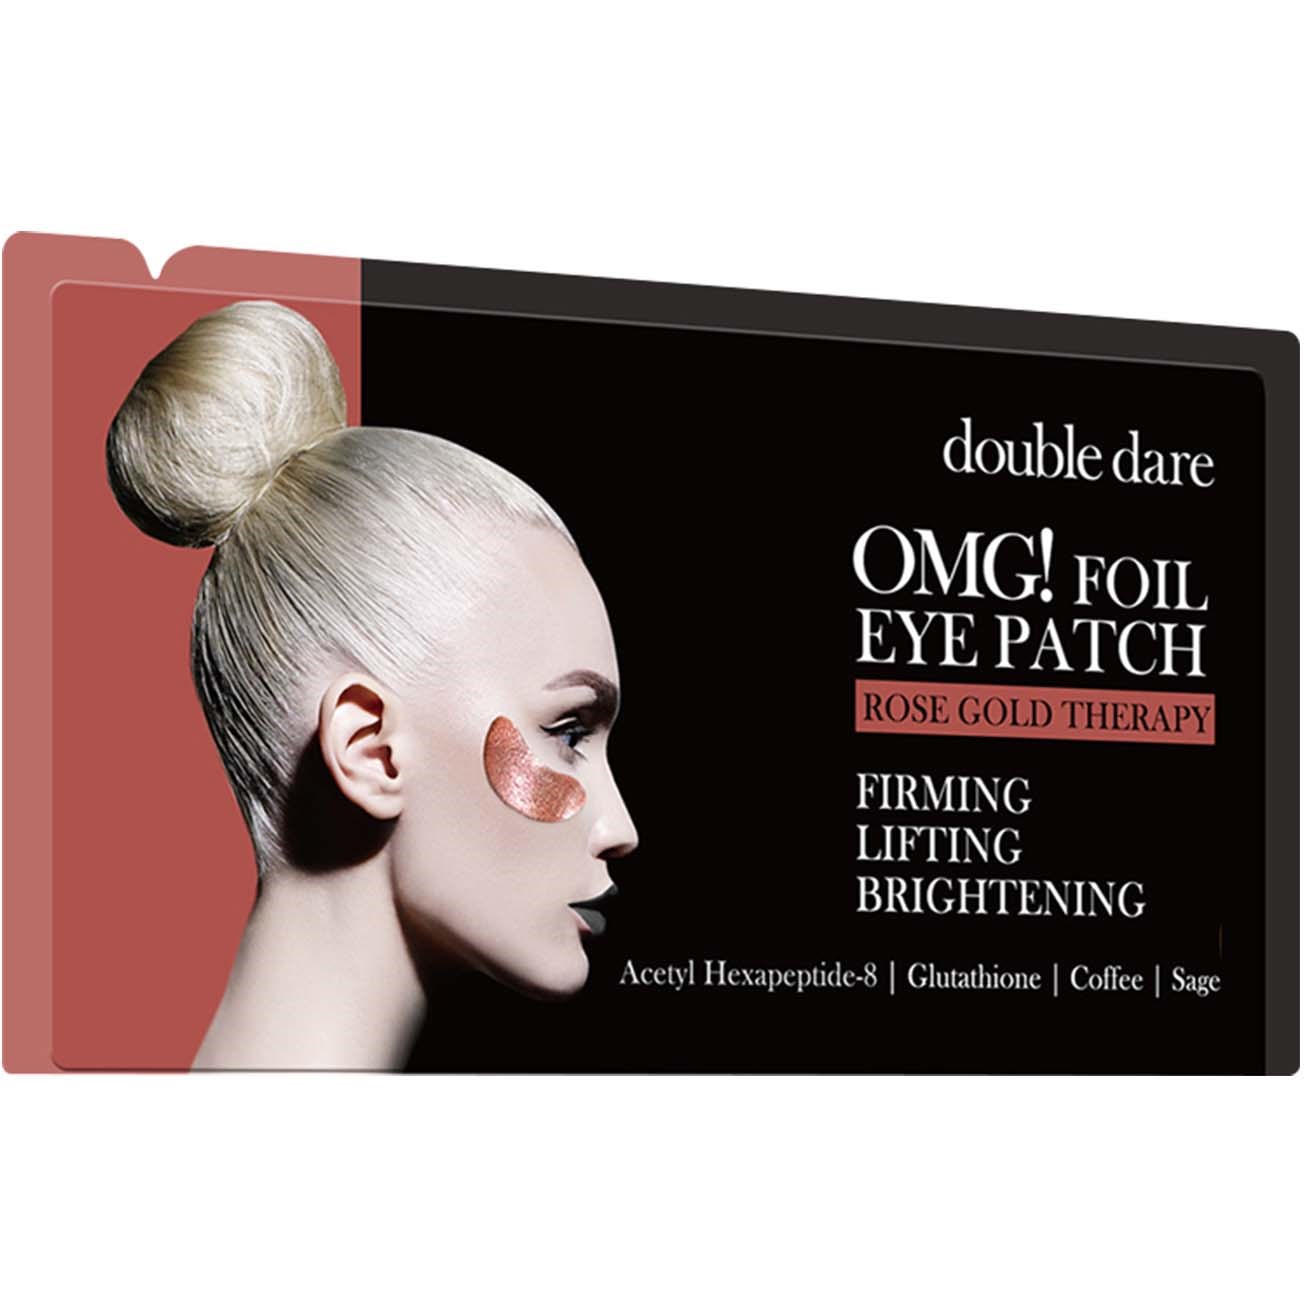 Läs mer om OMG! Double Dare Foil Eye Patch Rose Gold Therapy